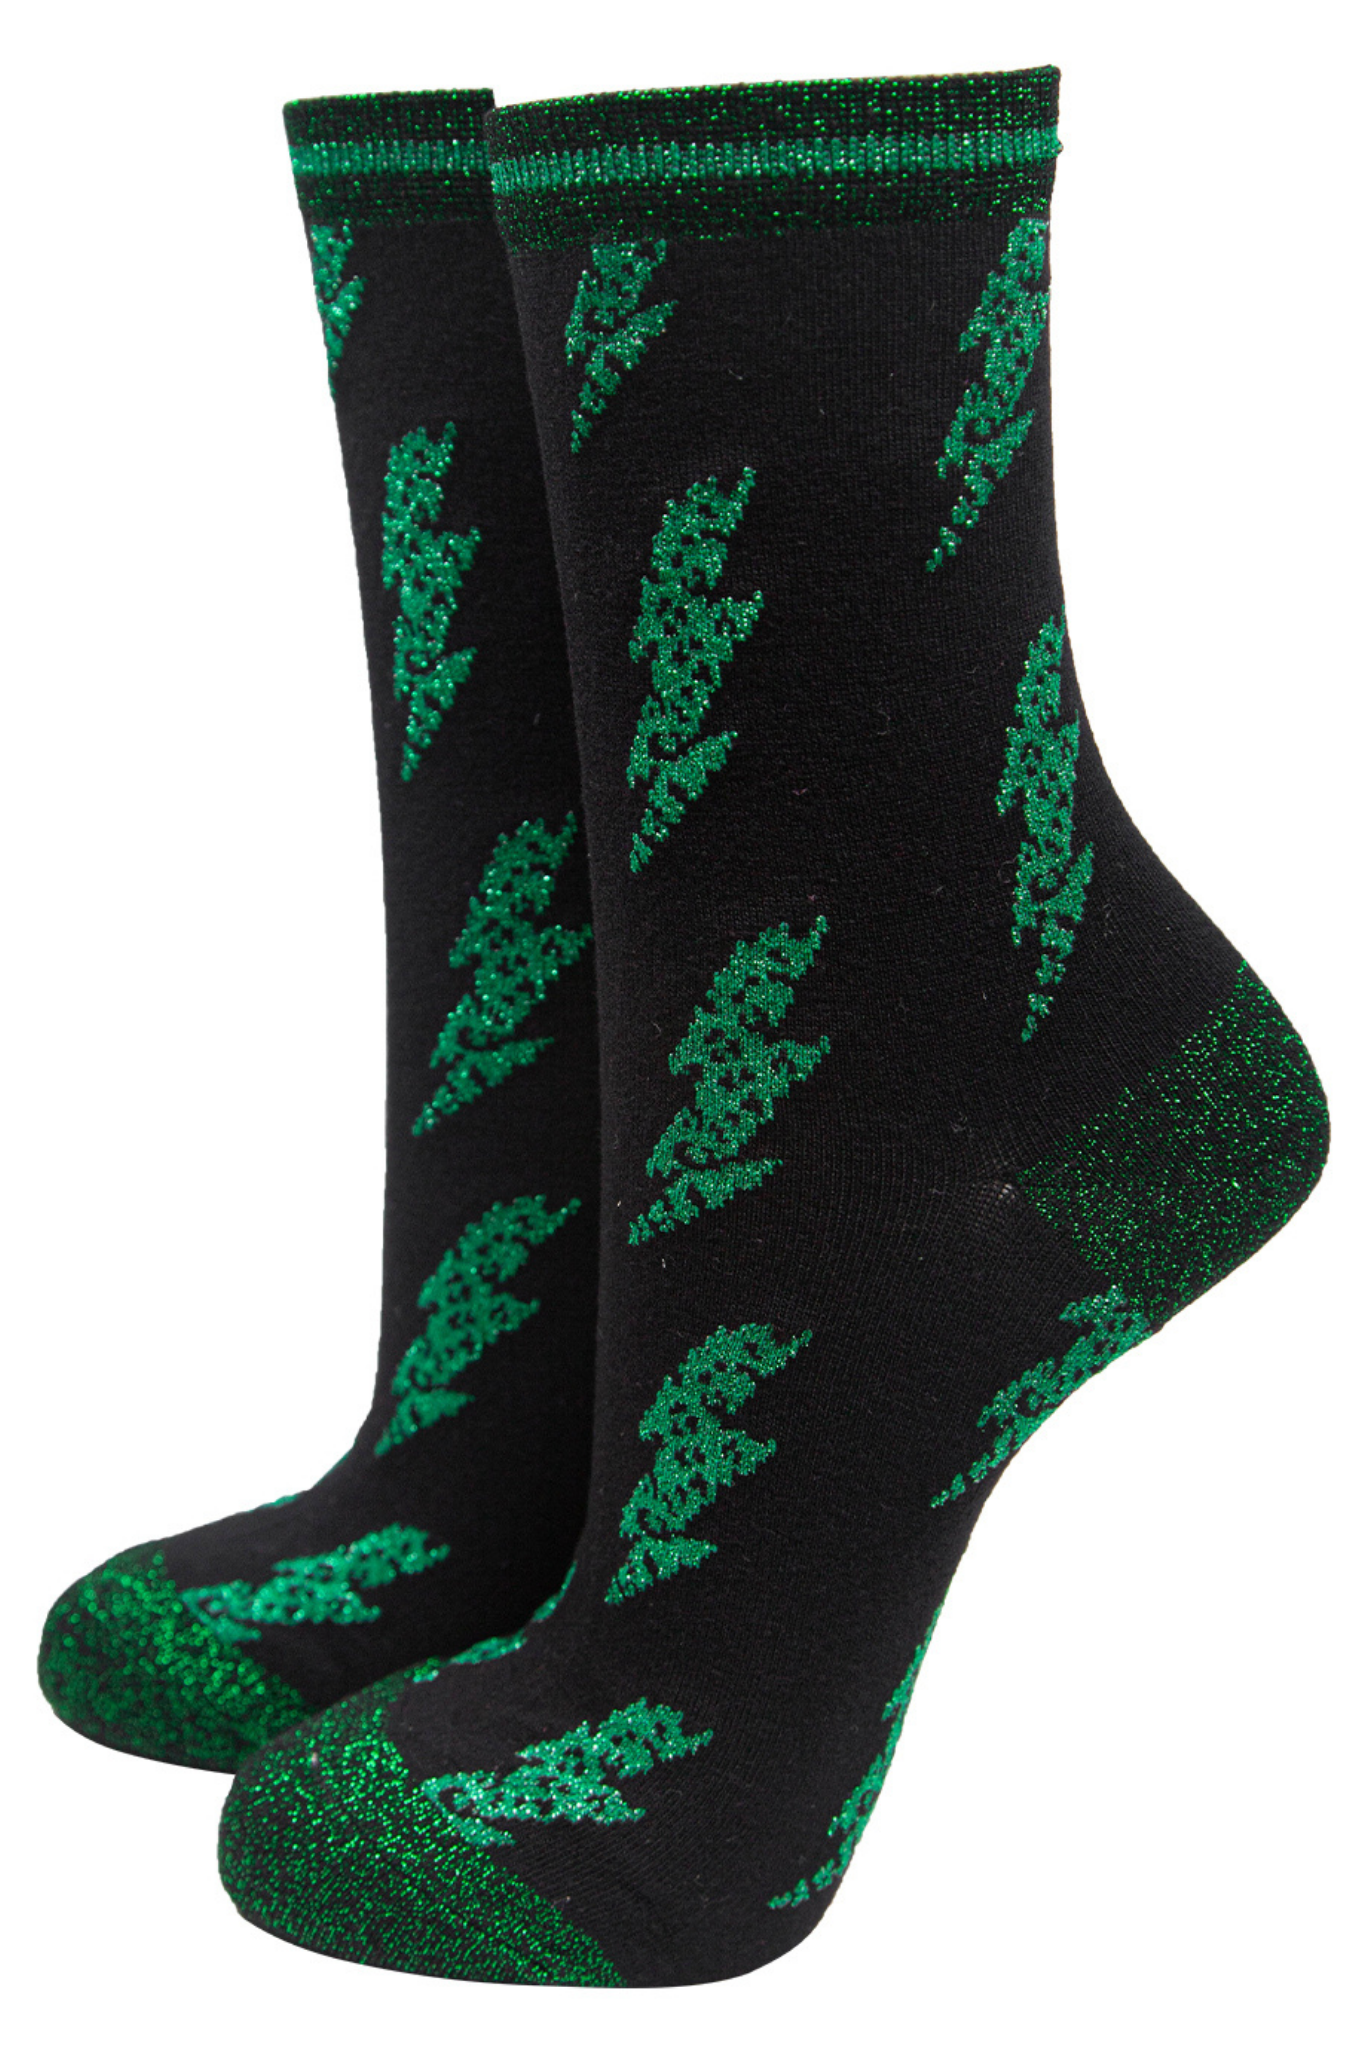 black and green lightning bolt bamboo socks with glitter heel, toe and trim